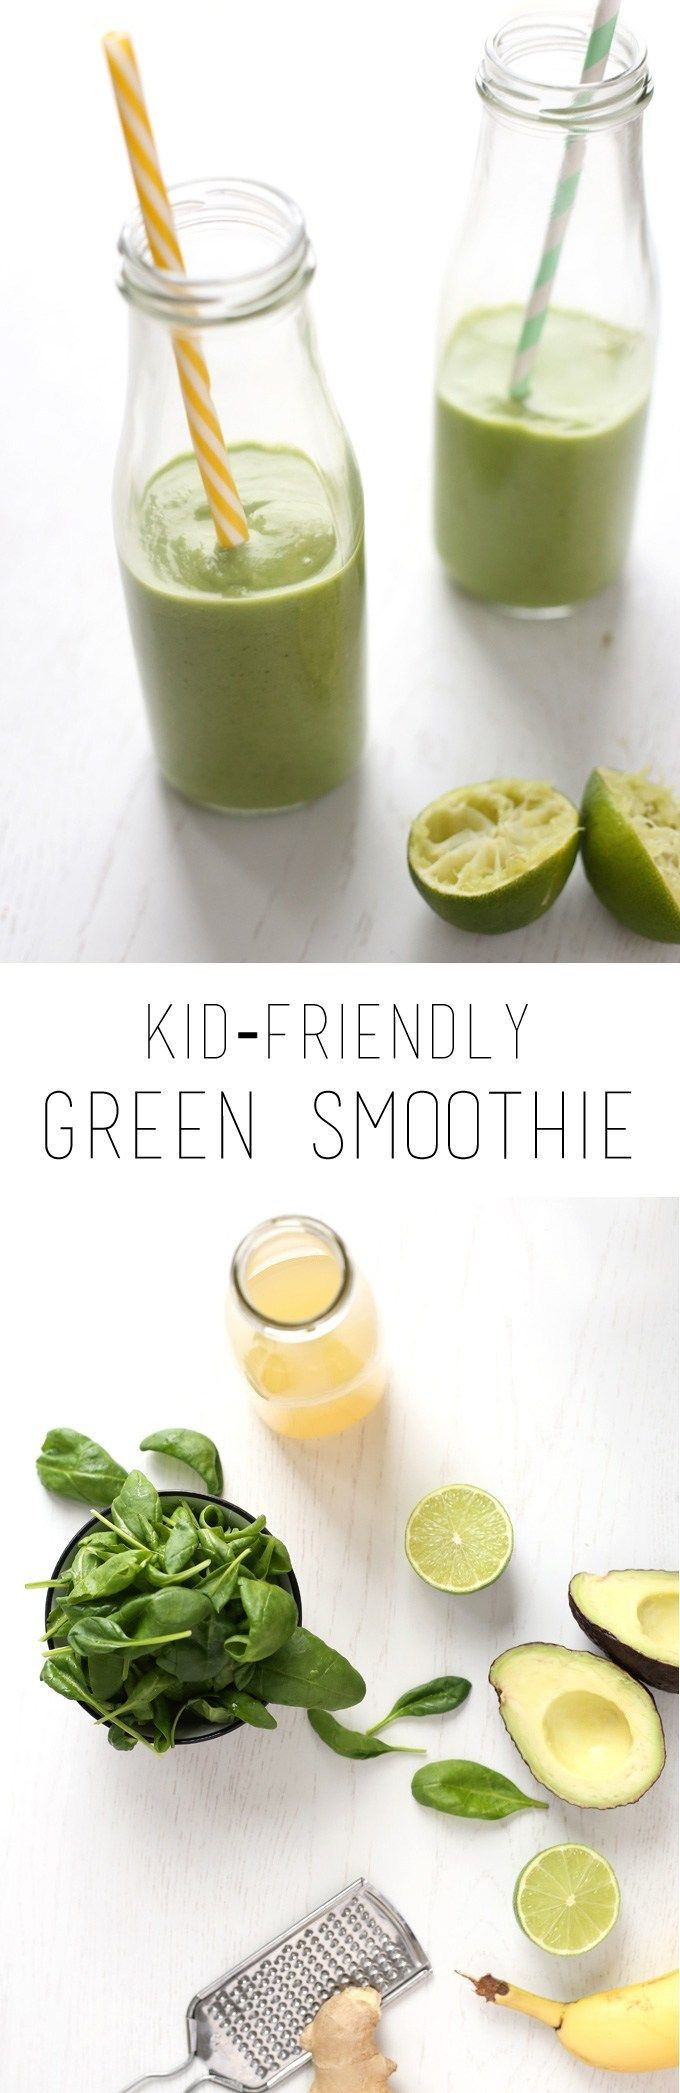 Healthy Kid Friendly Smoothies
 Kid friendly green smoothie Kid licious Kitchen With